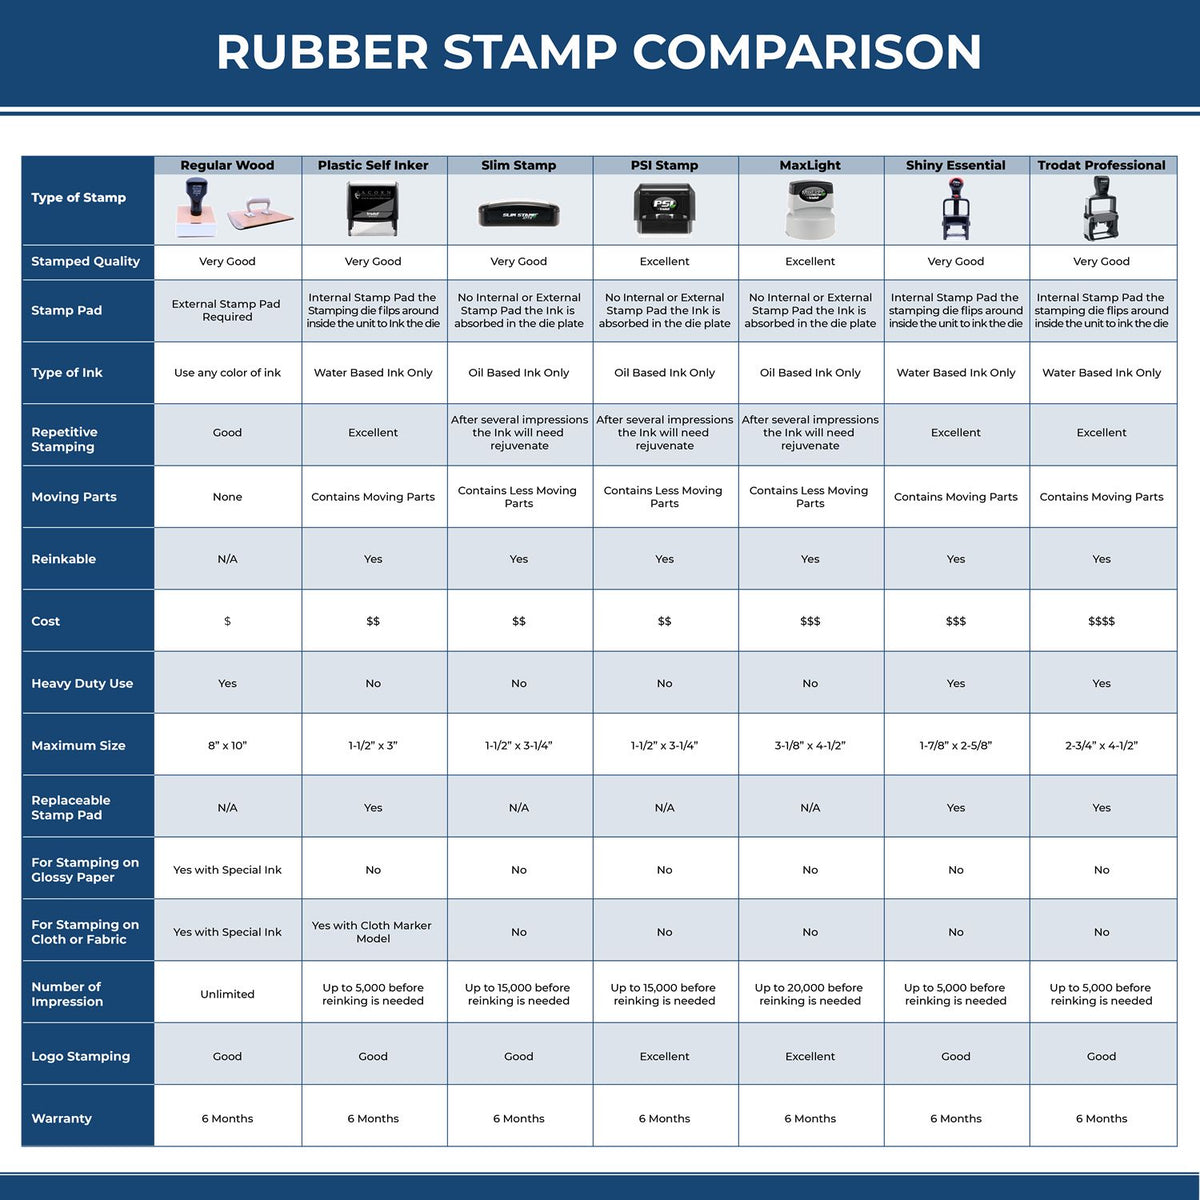 A comparison chart for the different types of mount models available for the PSI Kentucky Notary Stamp.